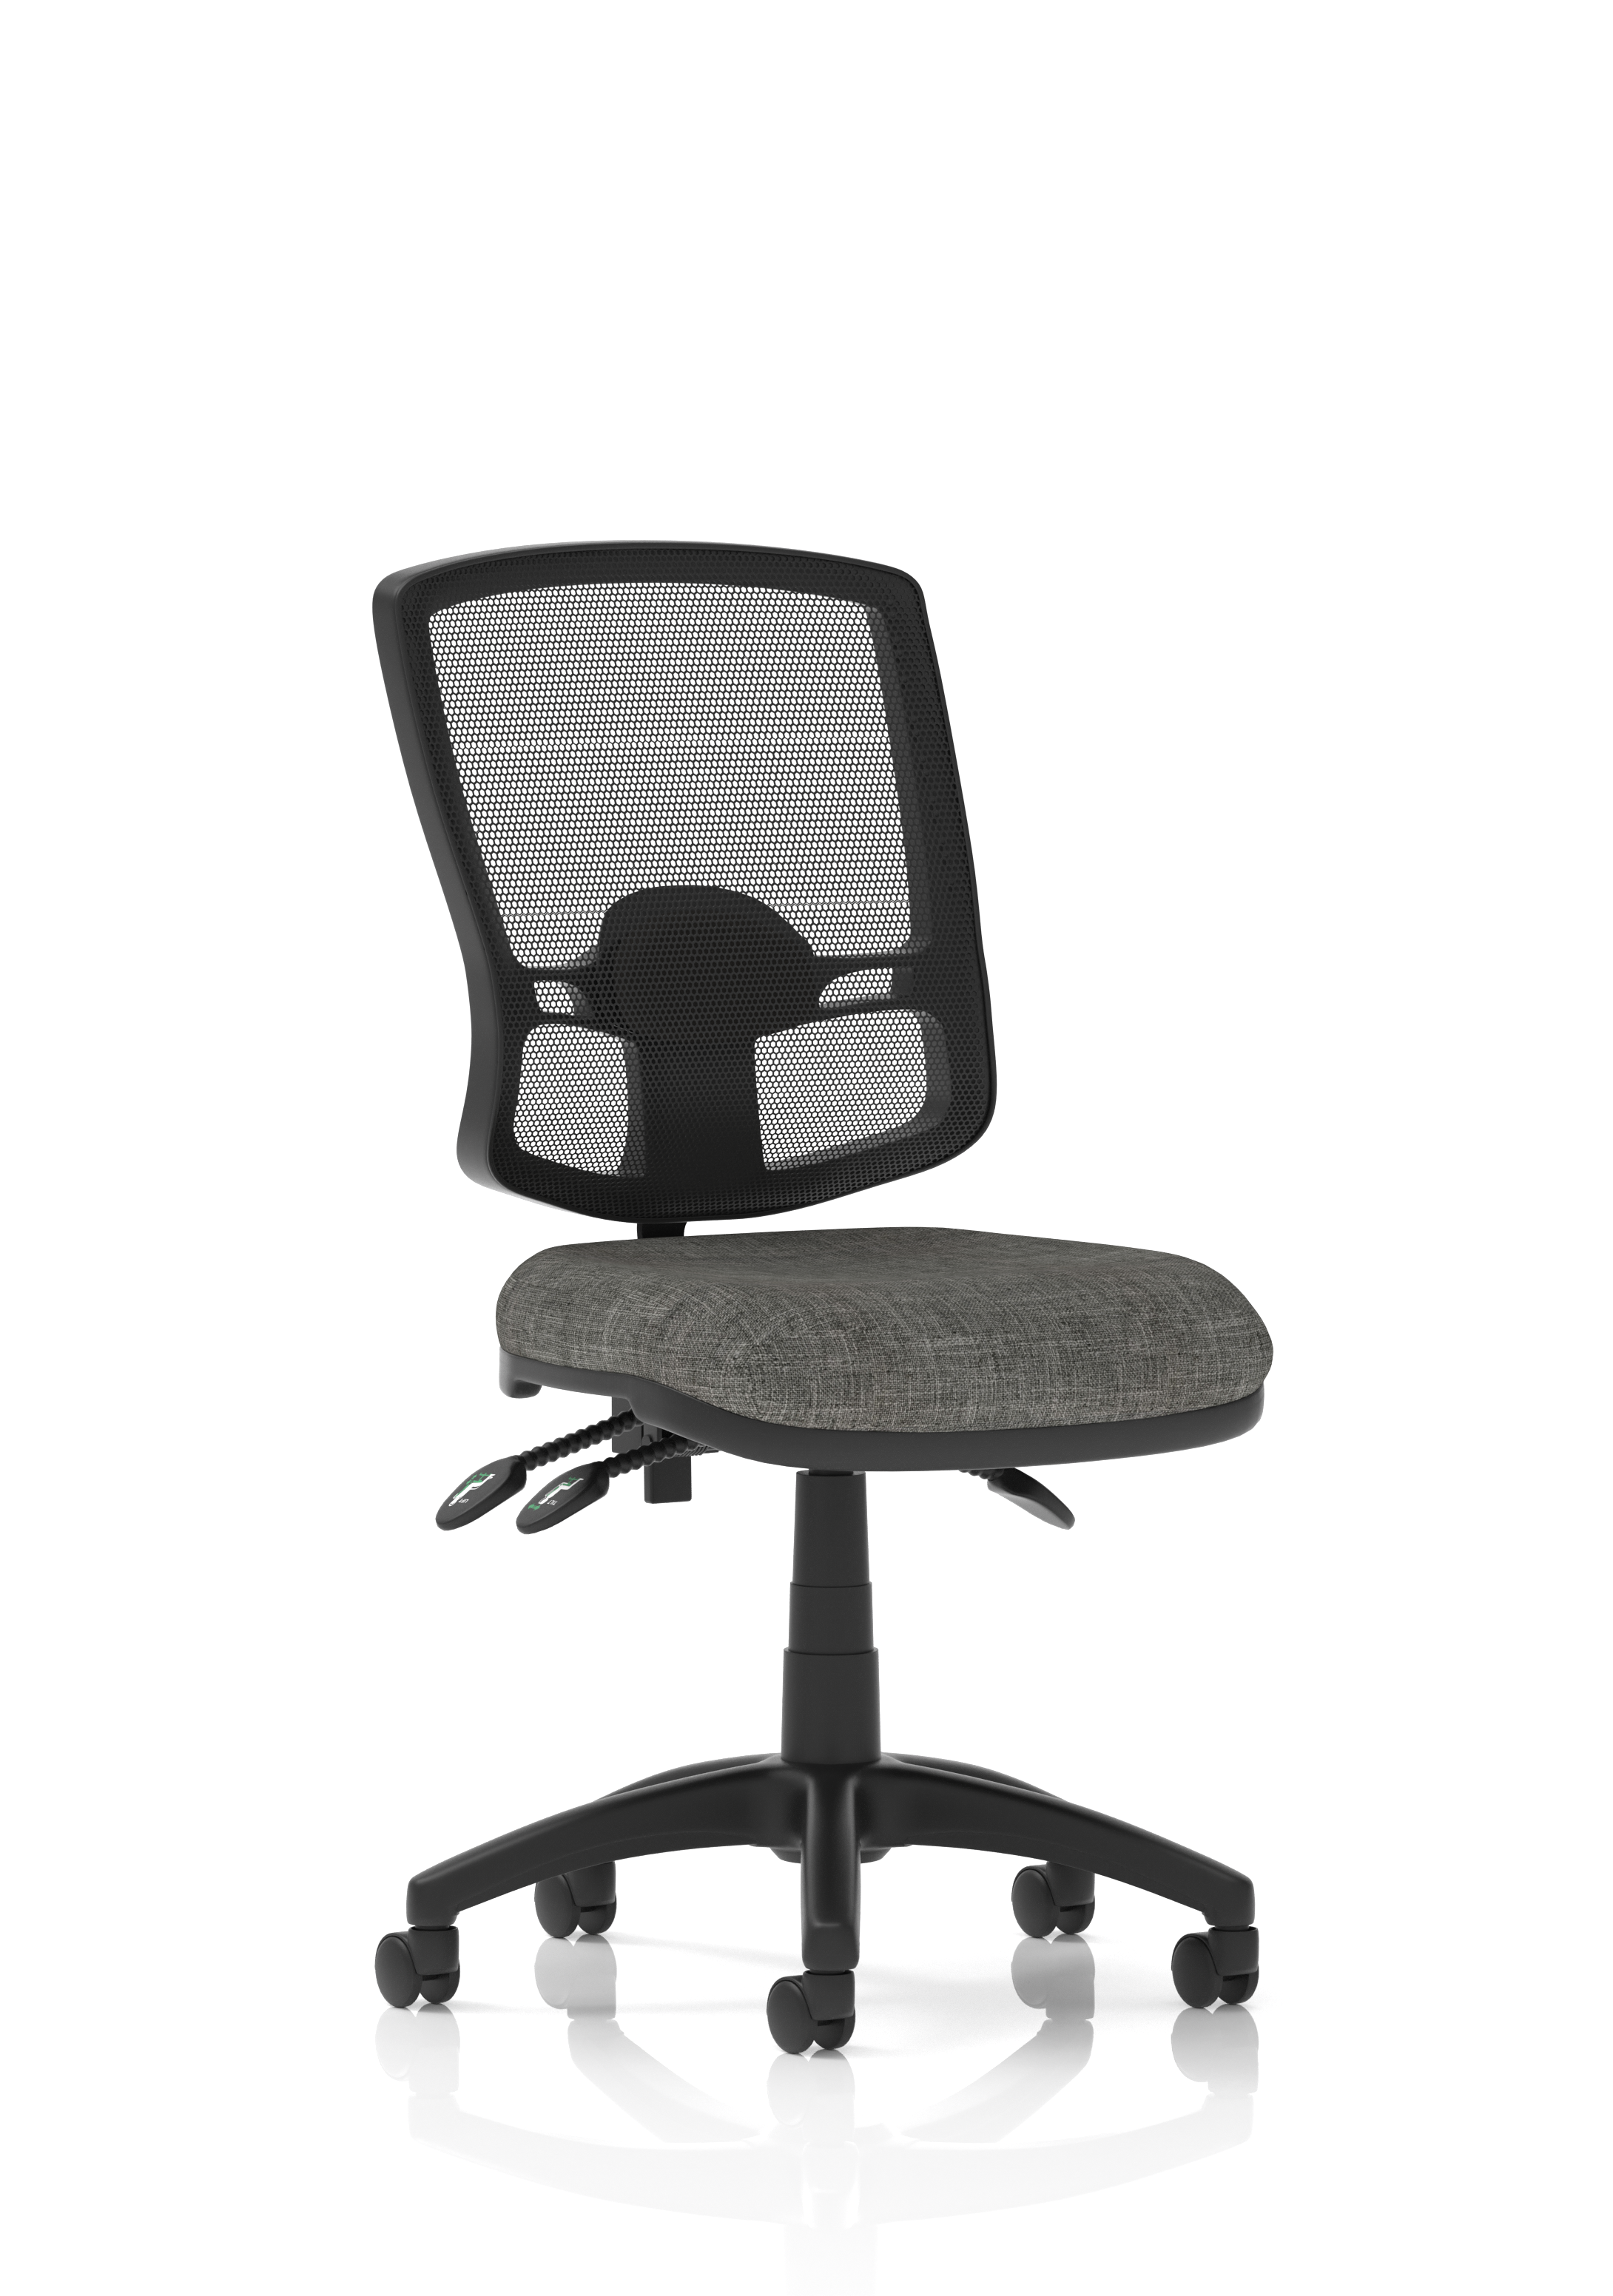 Eclipse Plus III Deluxe Mesh Back With Black Seat Image 2